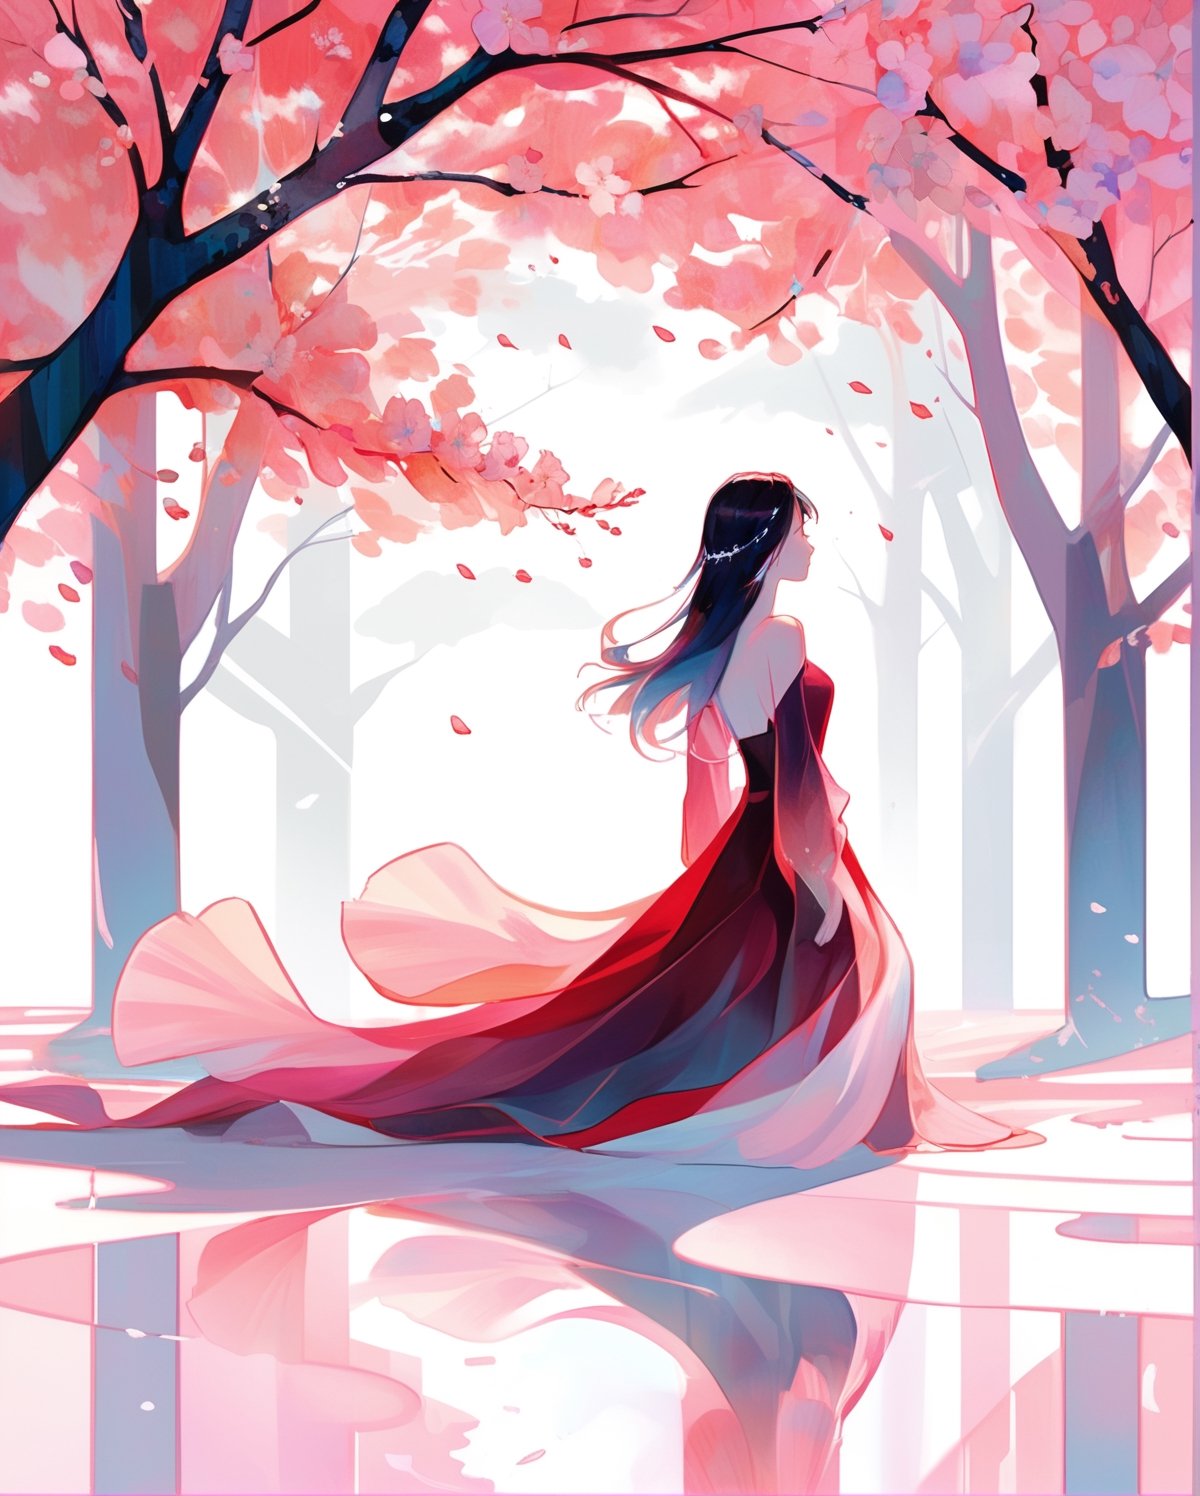 A stunning, abstract art piece featuring a mesmerizing symphony of translucent, fragmented shapes. The composition is a harmonious blend of geometric forms in soft pinks and whites, reminiscent of cherry blossom petals dancing in the breeze. The overlapping and intertwining elements create a kaleidoscopic effect, blurring the lines between positive and negative space. Ethereal gradients and atmospheric washes imbue the work with an otherworldly aura, reflecting the fleeting beauty of cherry blossoms. The interplay of precise angular compositions and organic forms captures the delicate balance between order and chaos in the transient spectacle of blooming cherry trees. This modern geometric interpretation offers a captivating, meditative exploration of light, form, and movement, distilling the essence of the ephemeral blossoms.